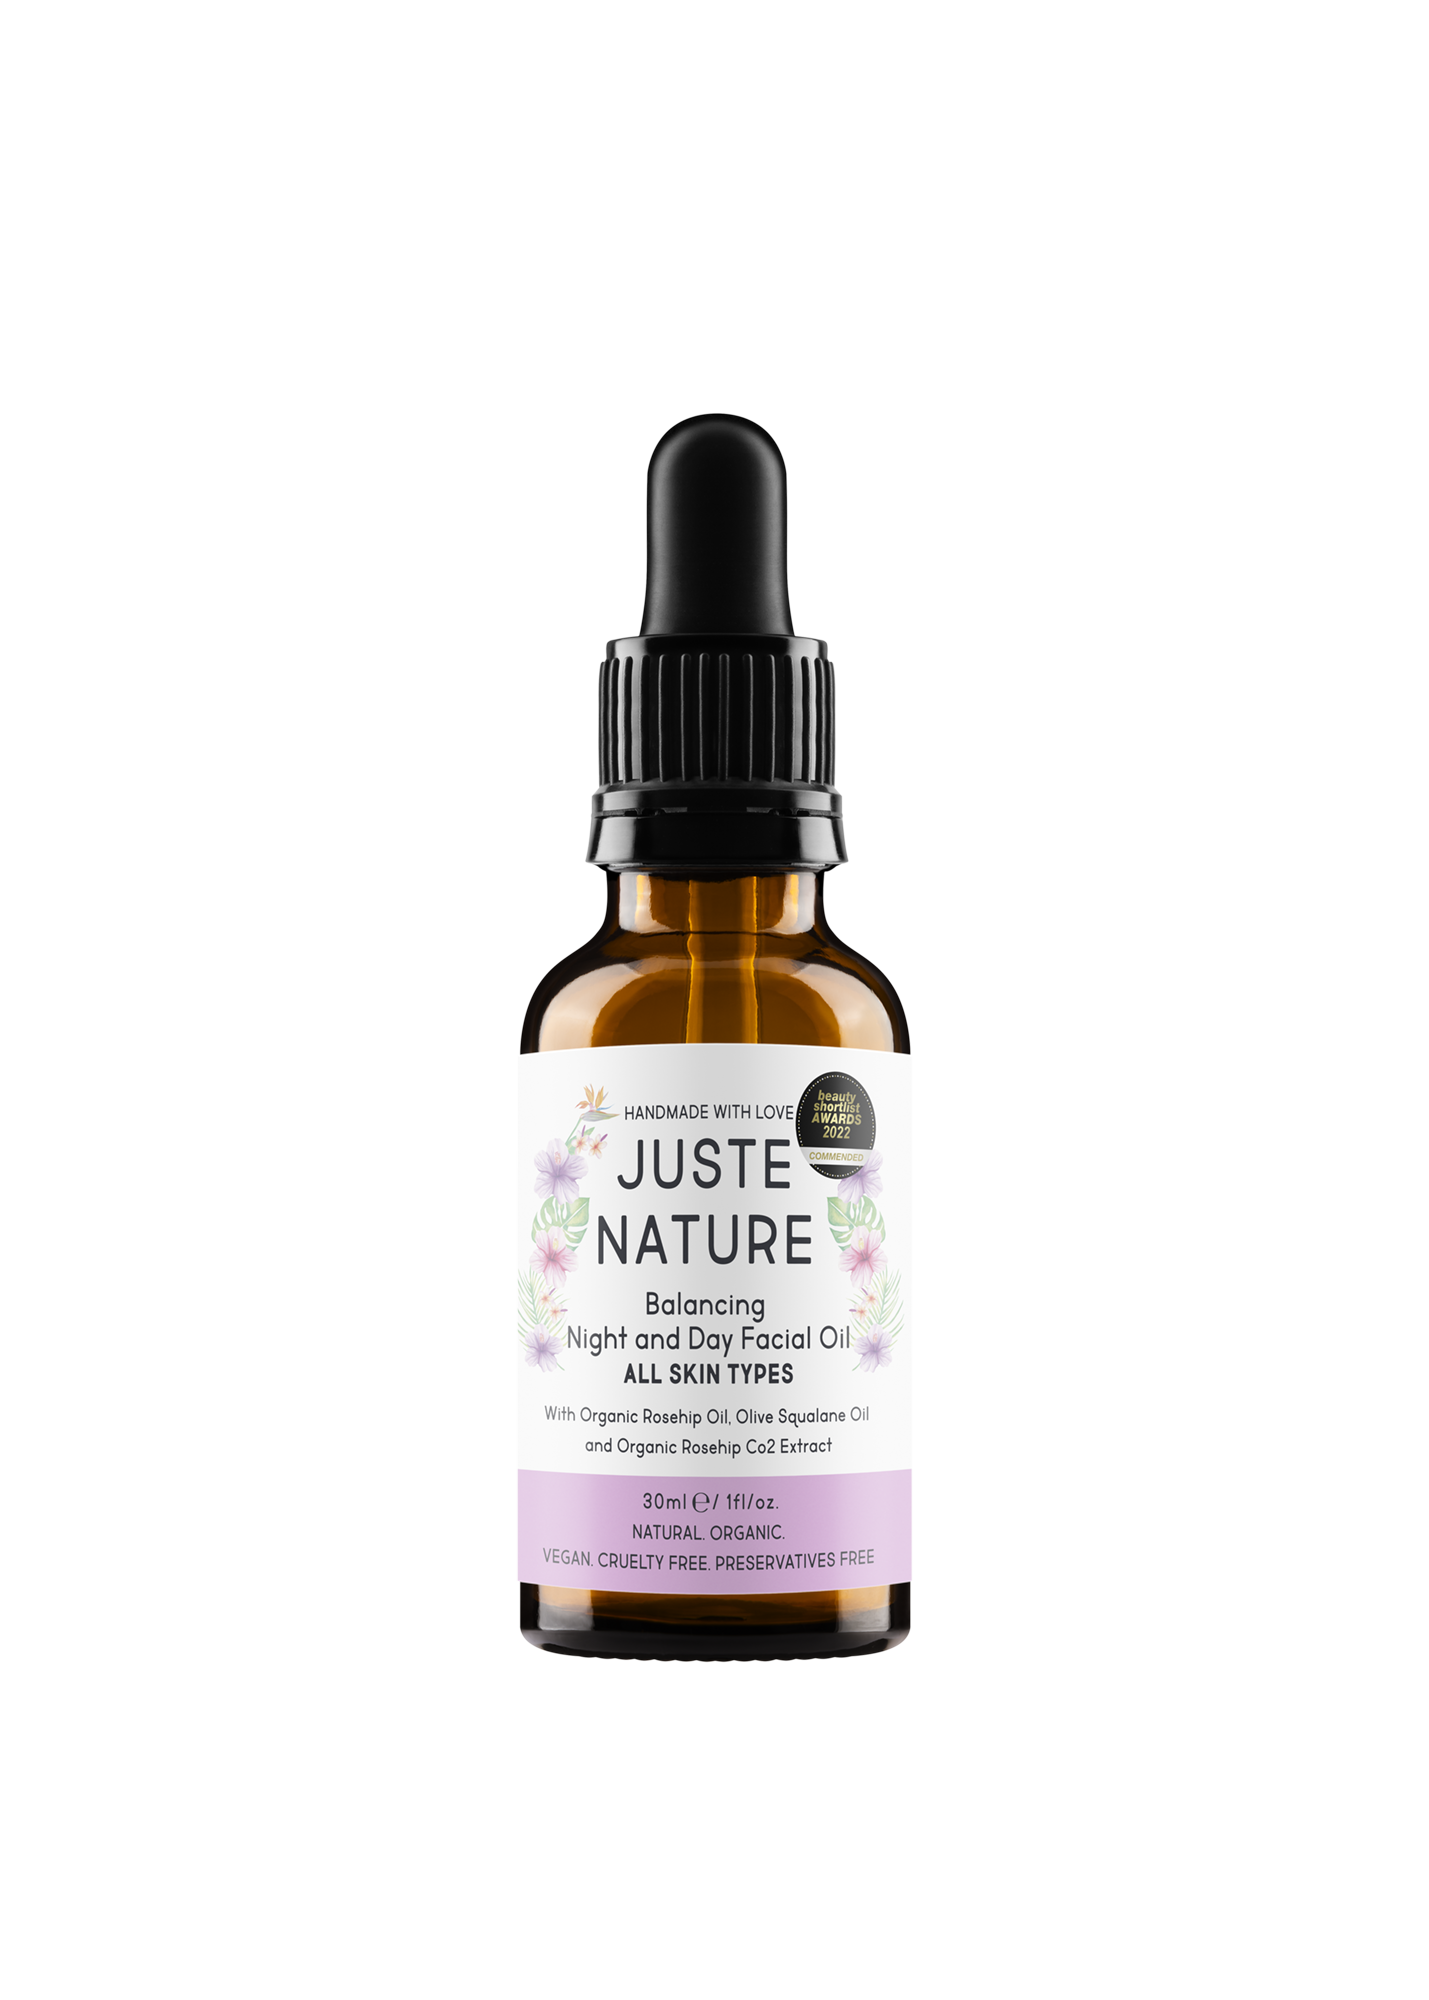 Juste Nature Balancing Night and Day Face oil